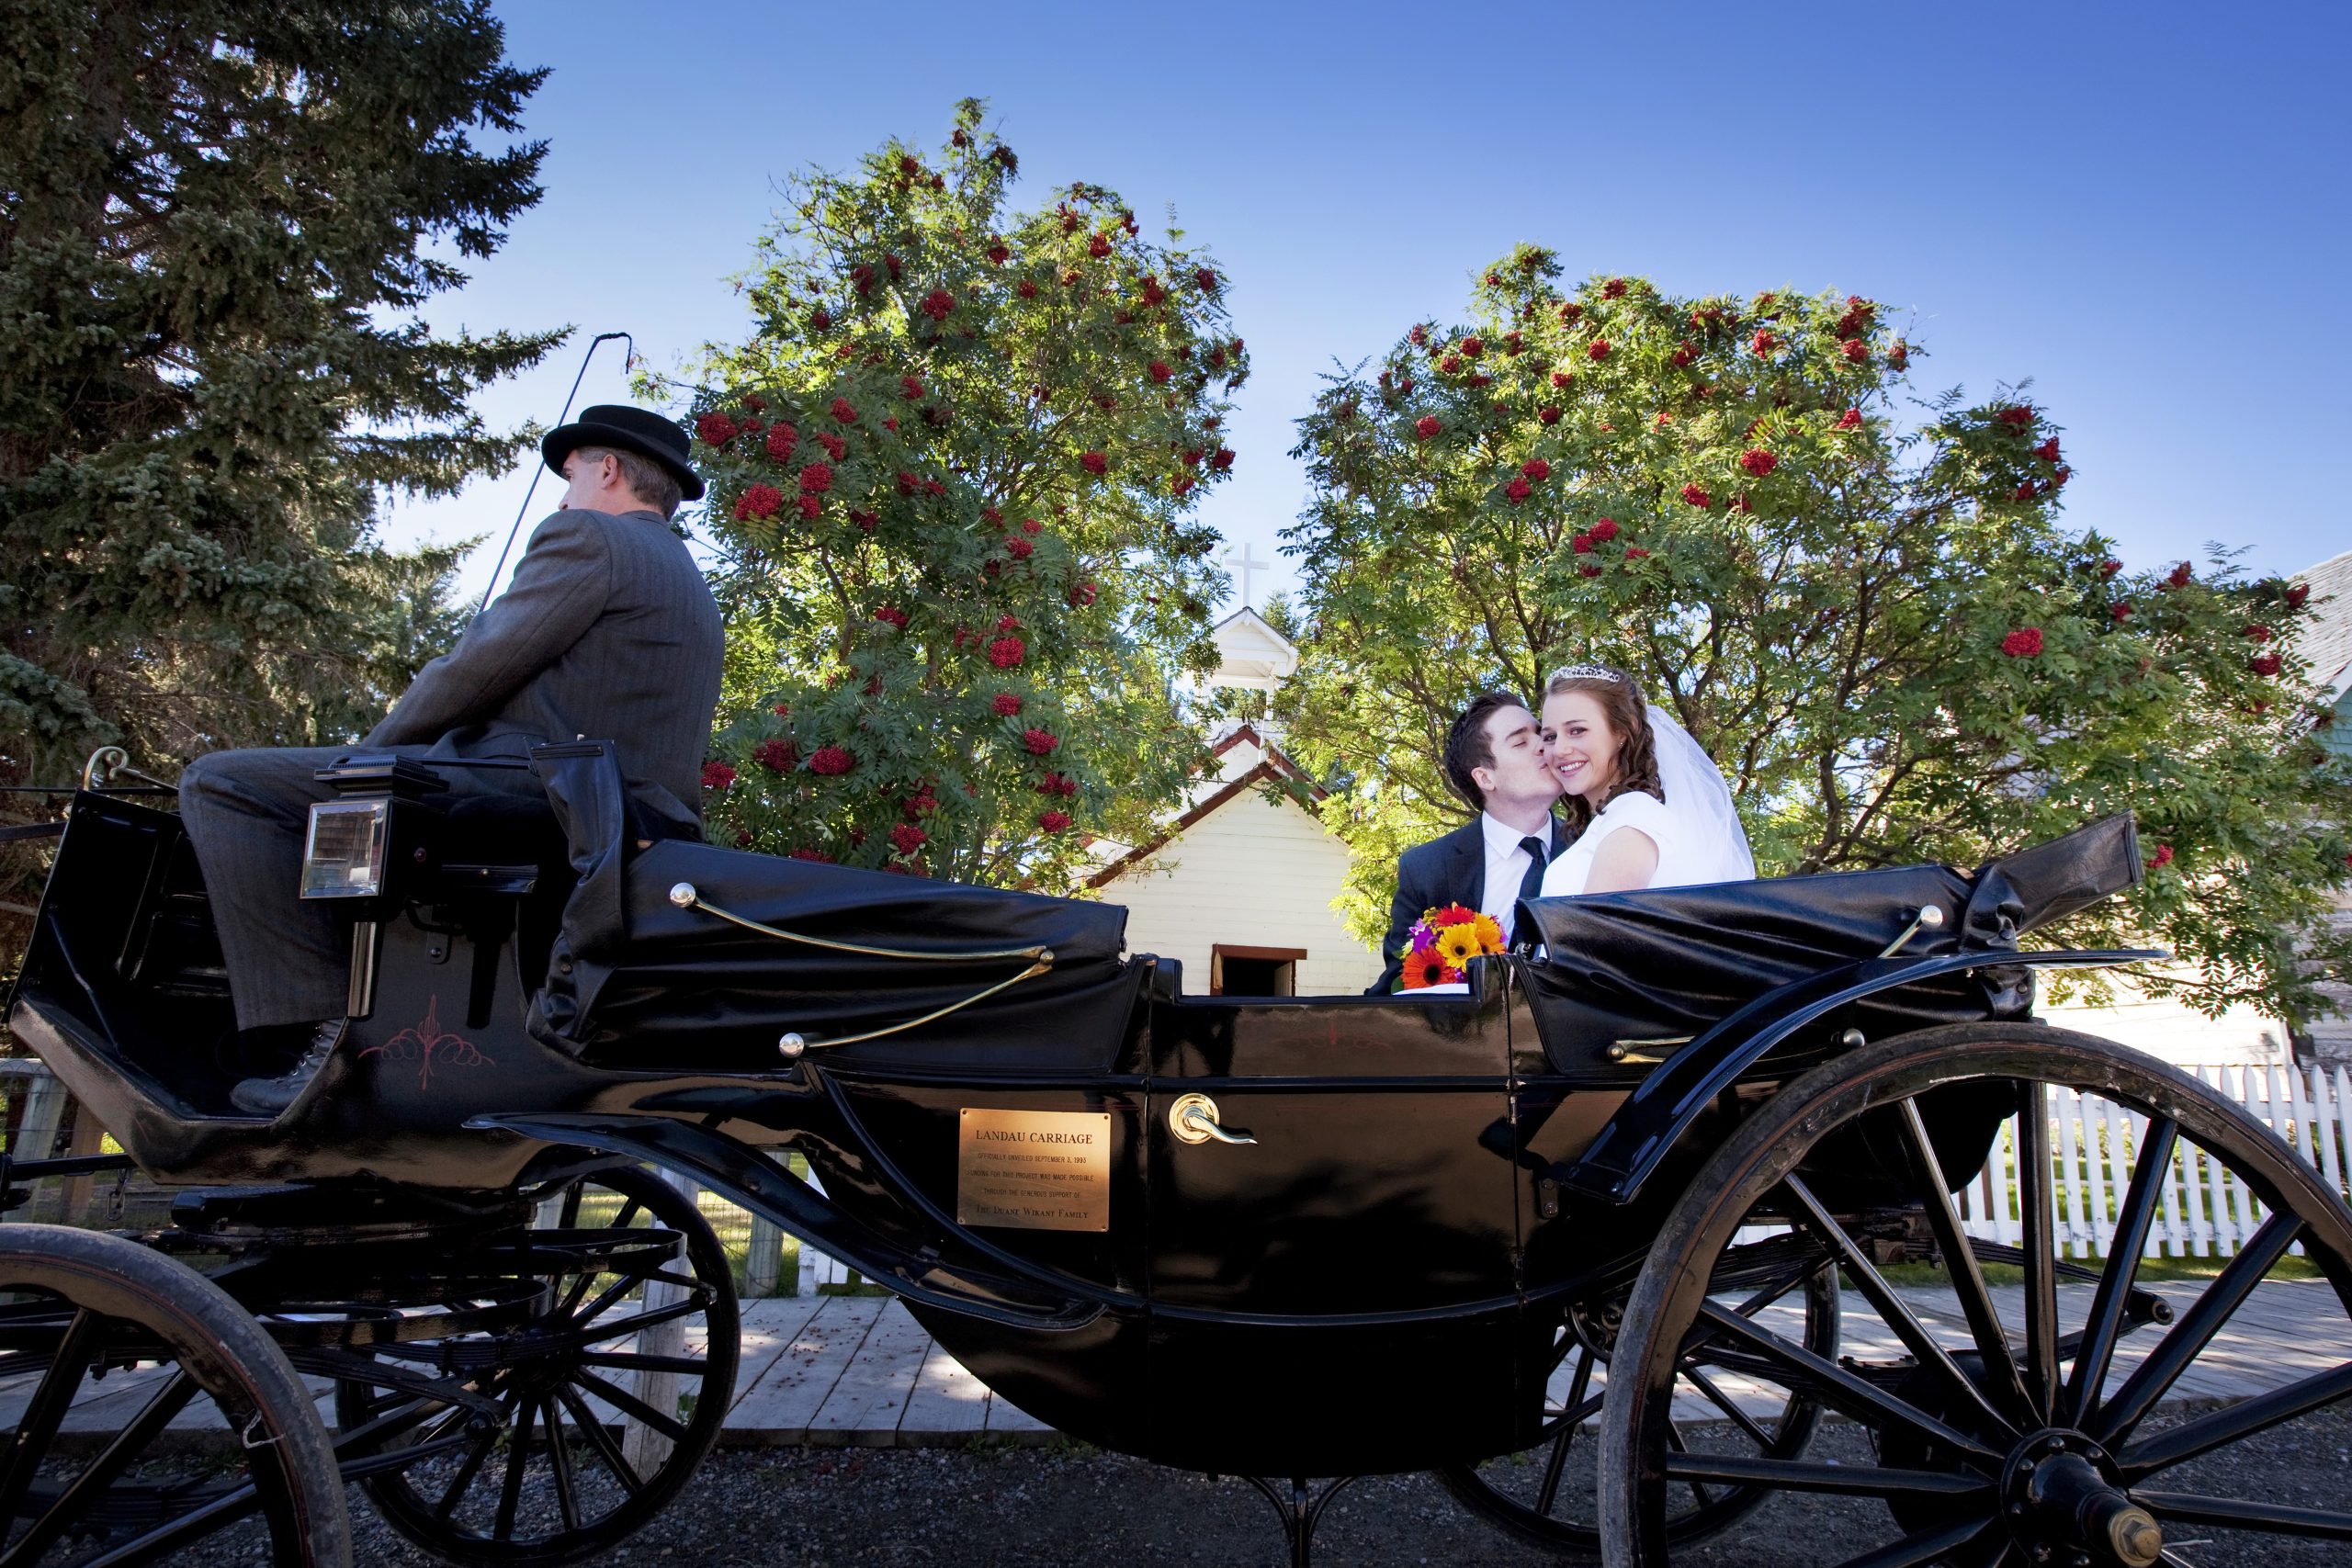 A couple kissing in an old-fashioned horse-drawn carriage